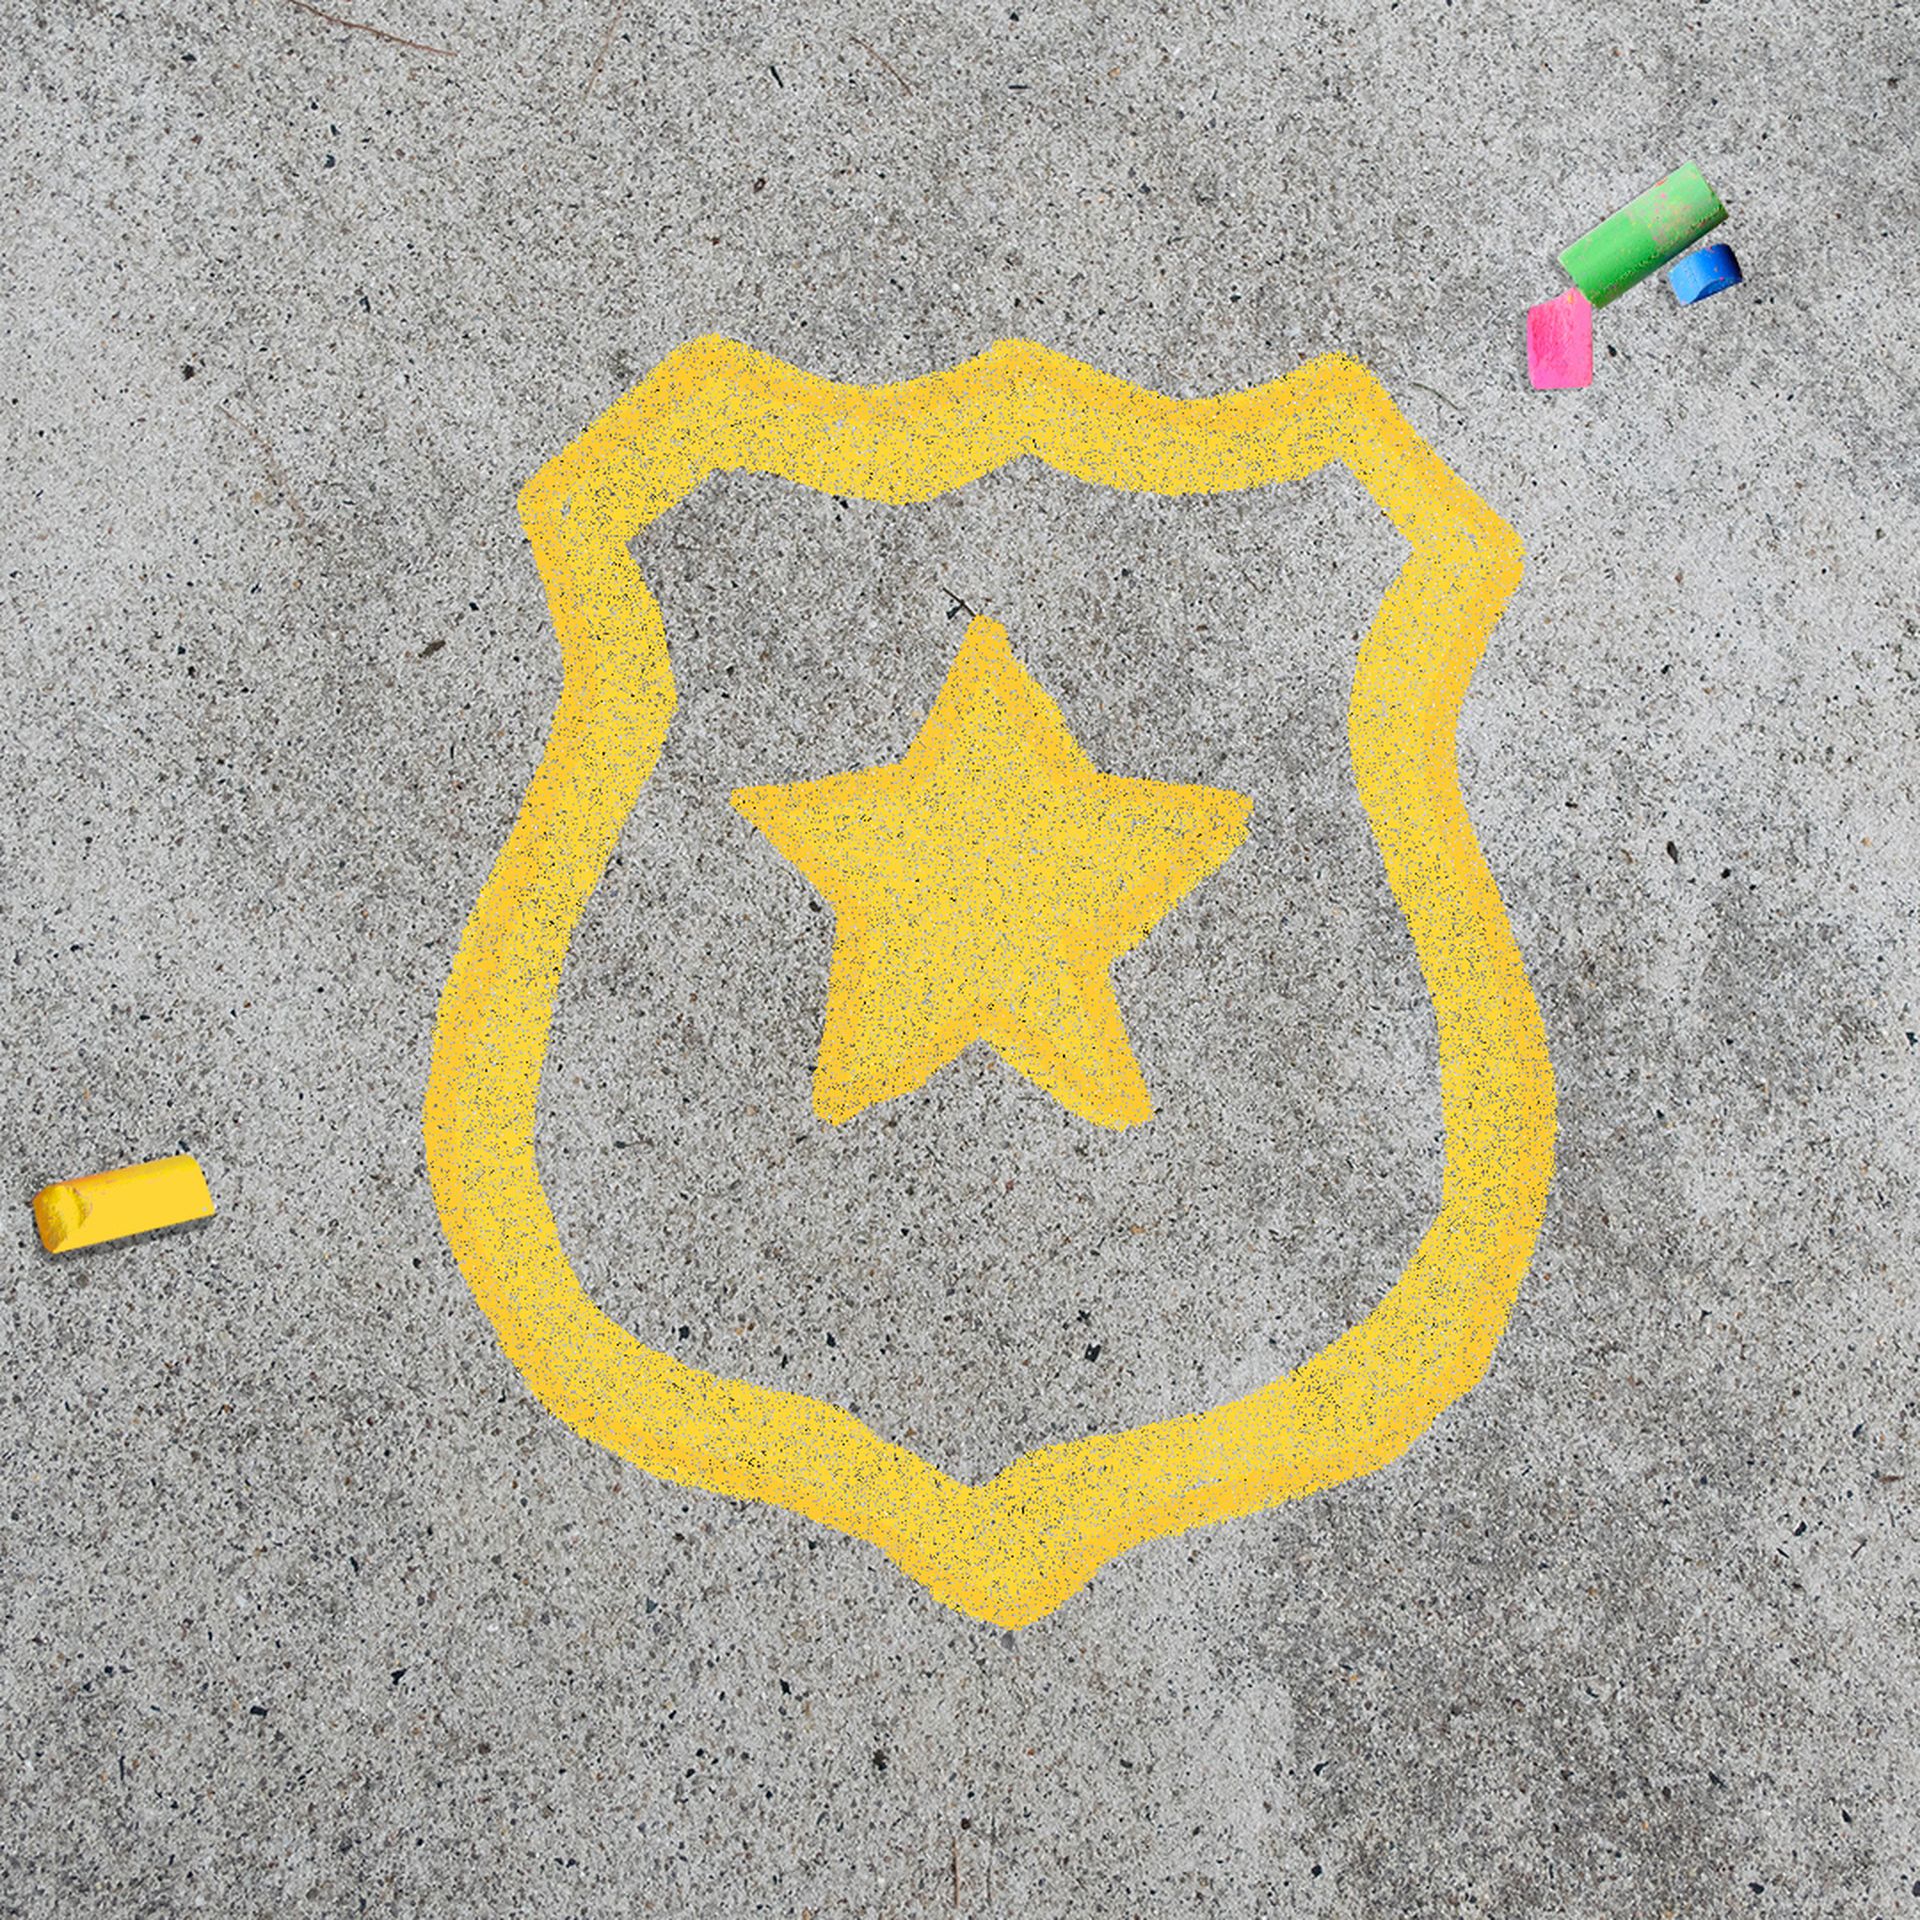 Illustration of a chalk drawing of a police badge on sidewalk.